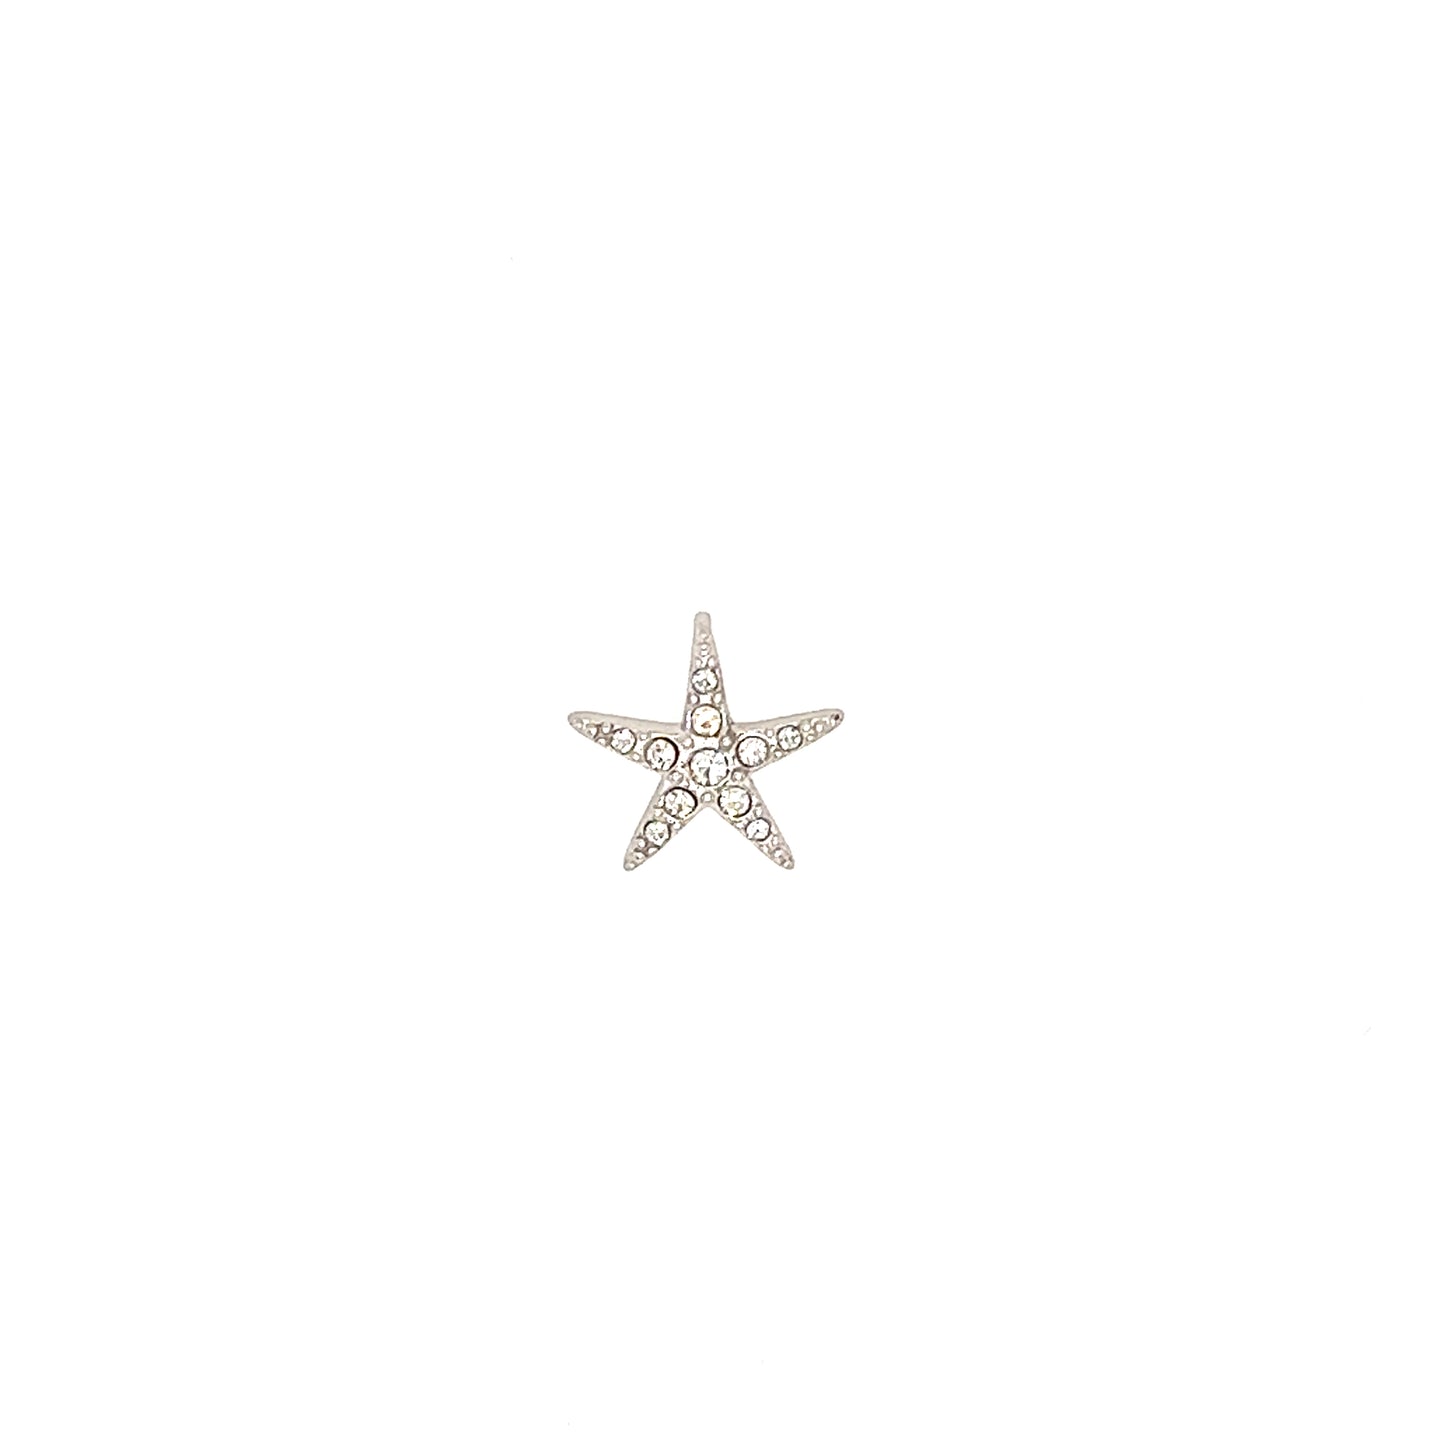 Small Starfish Necklace with White Crystals in Sterling Silver Top Pendant View